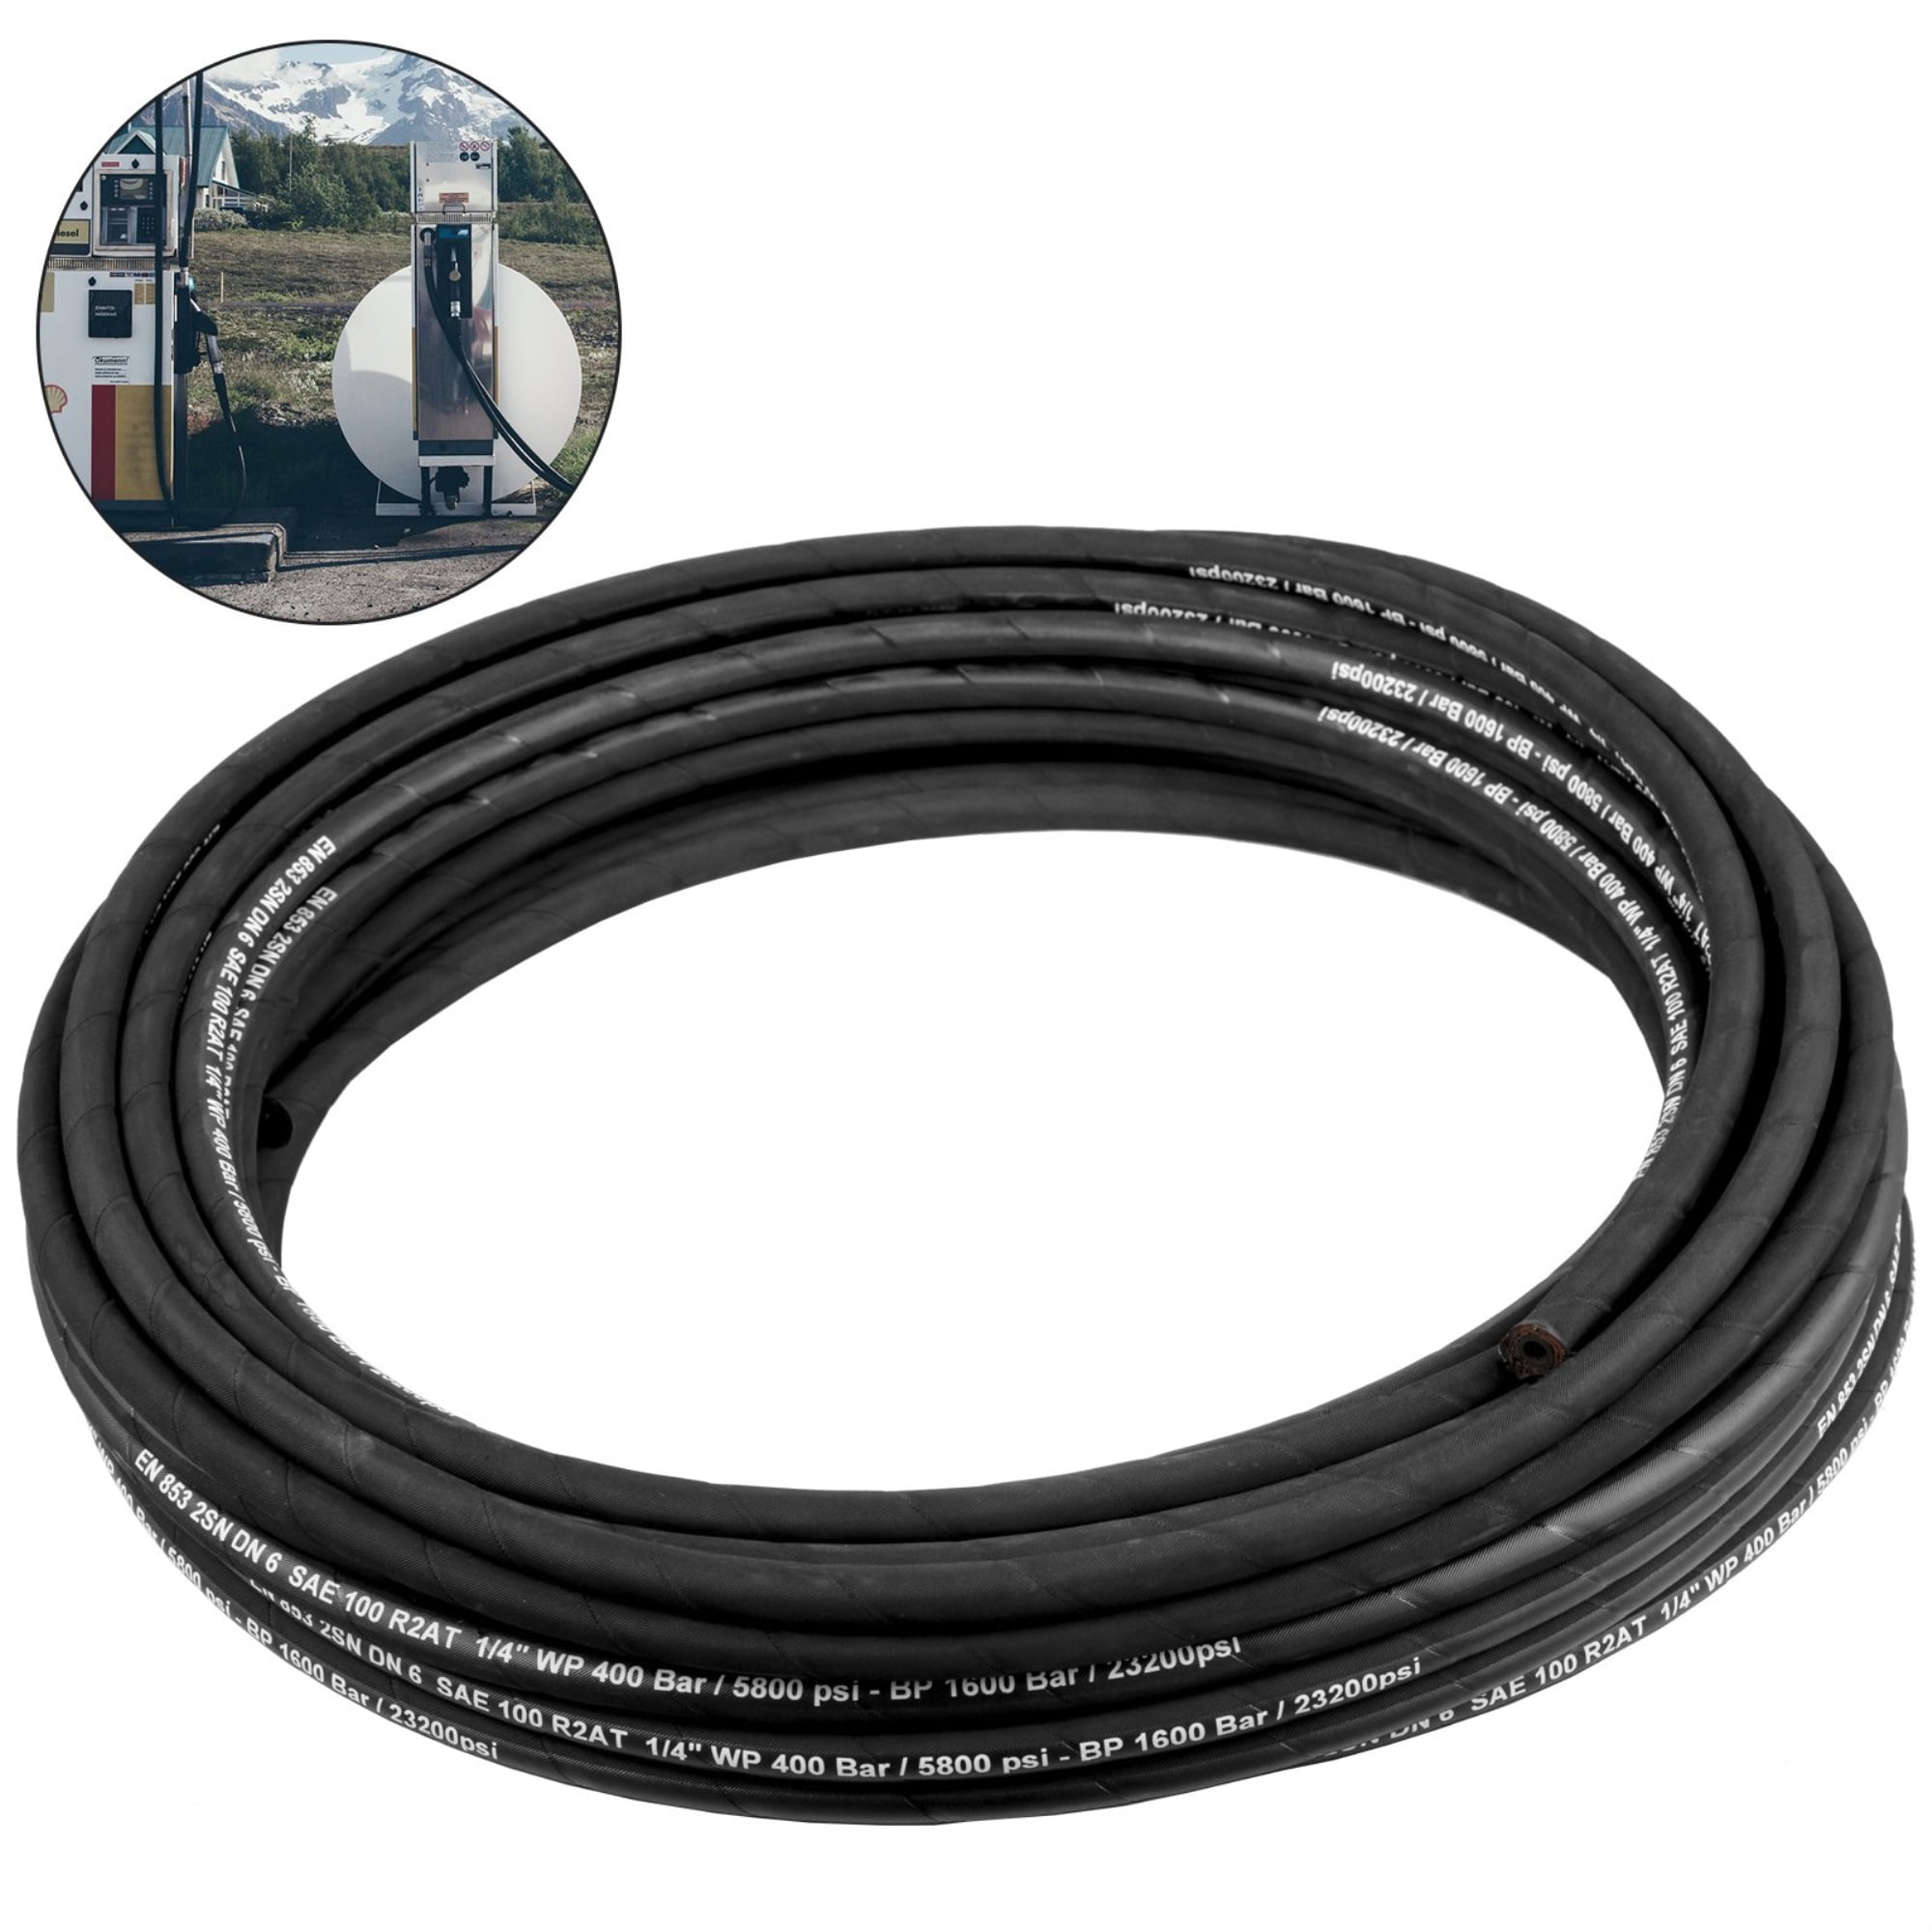 PSI 4800 2WIRE FREE SHIPPING HYDRAULIC HOSE 60FT R2T06 3/8 SAE W.P 